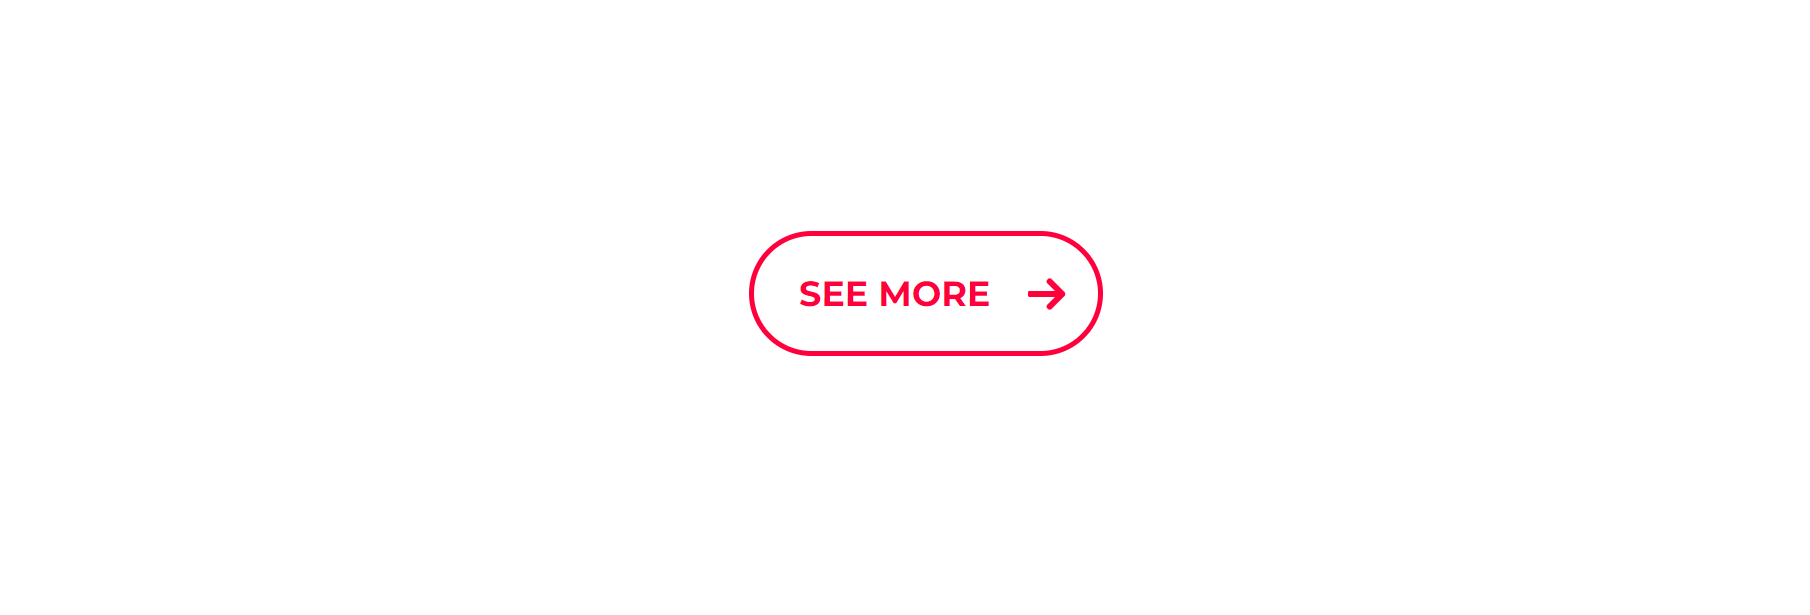 Digital Bake’s magnificently minimal button